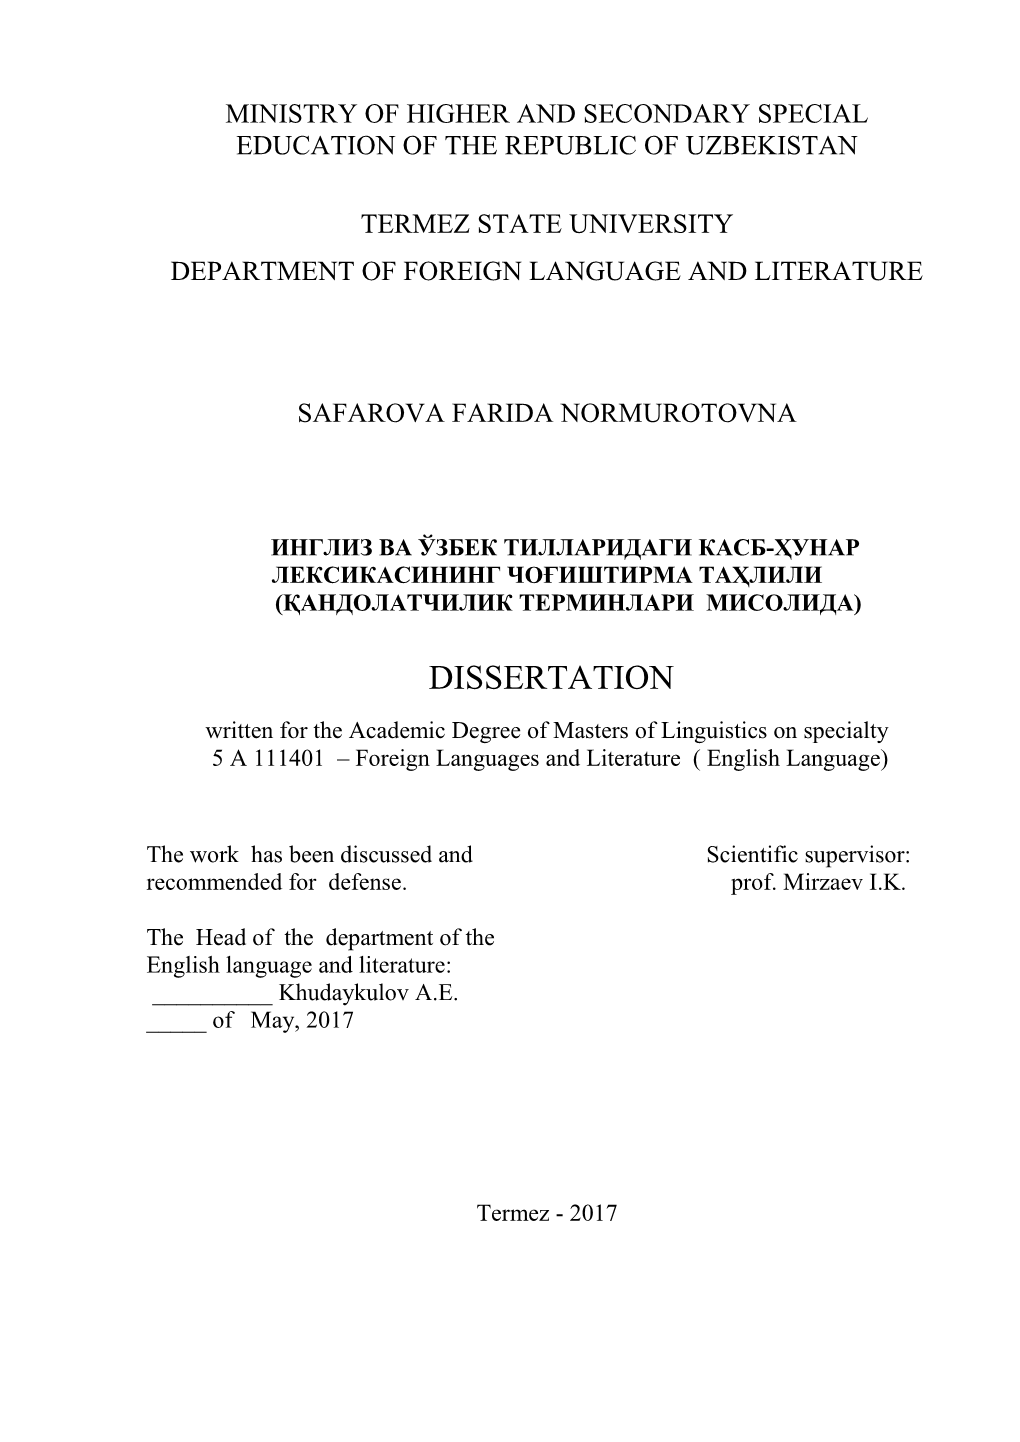 DISSERTATION Written for the Academic Degree of Masters of Linguistics on Specialty 5 a 111401 – Foreign Languages and Literature ( English Language)